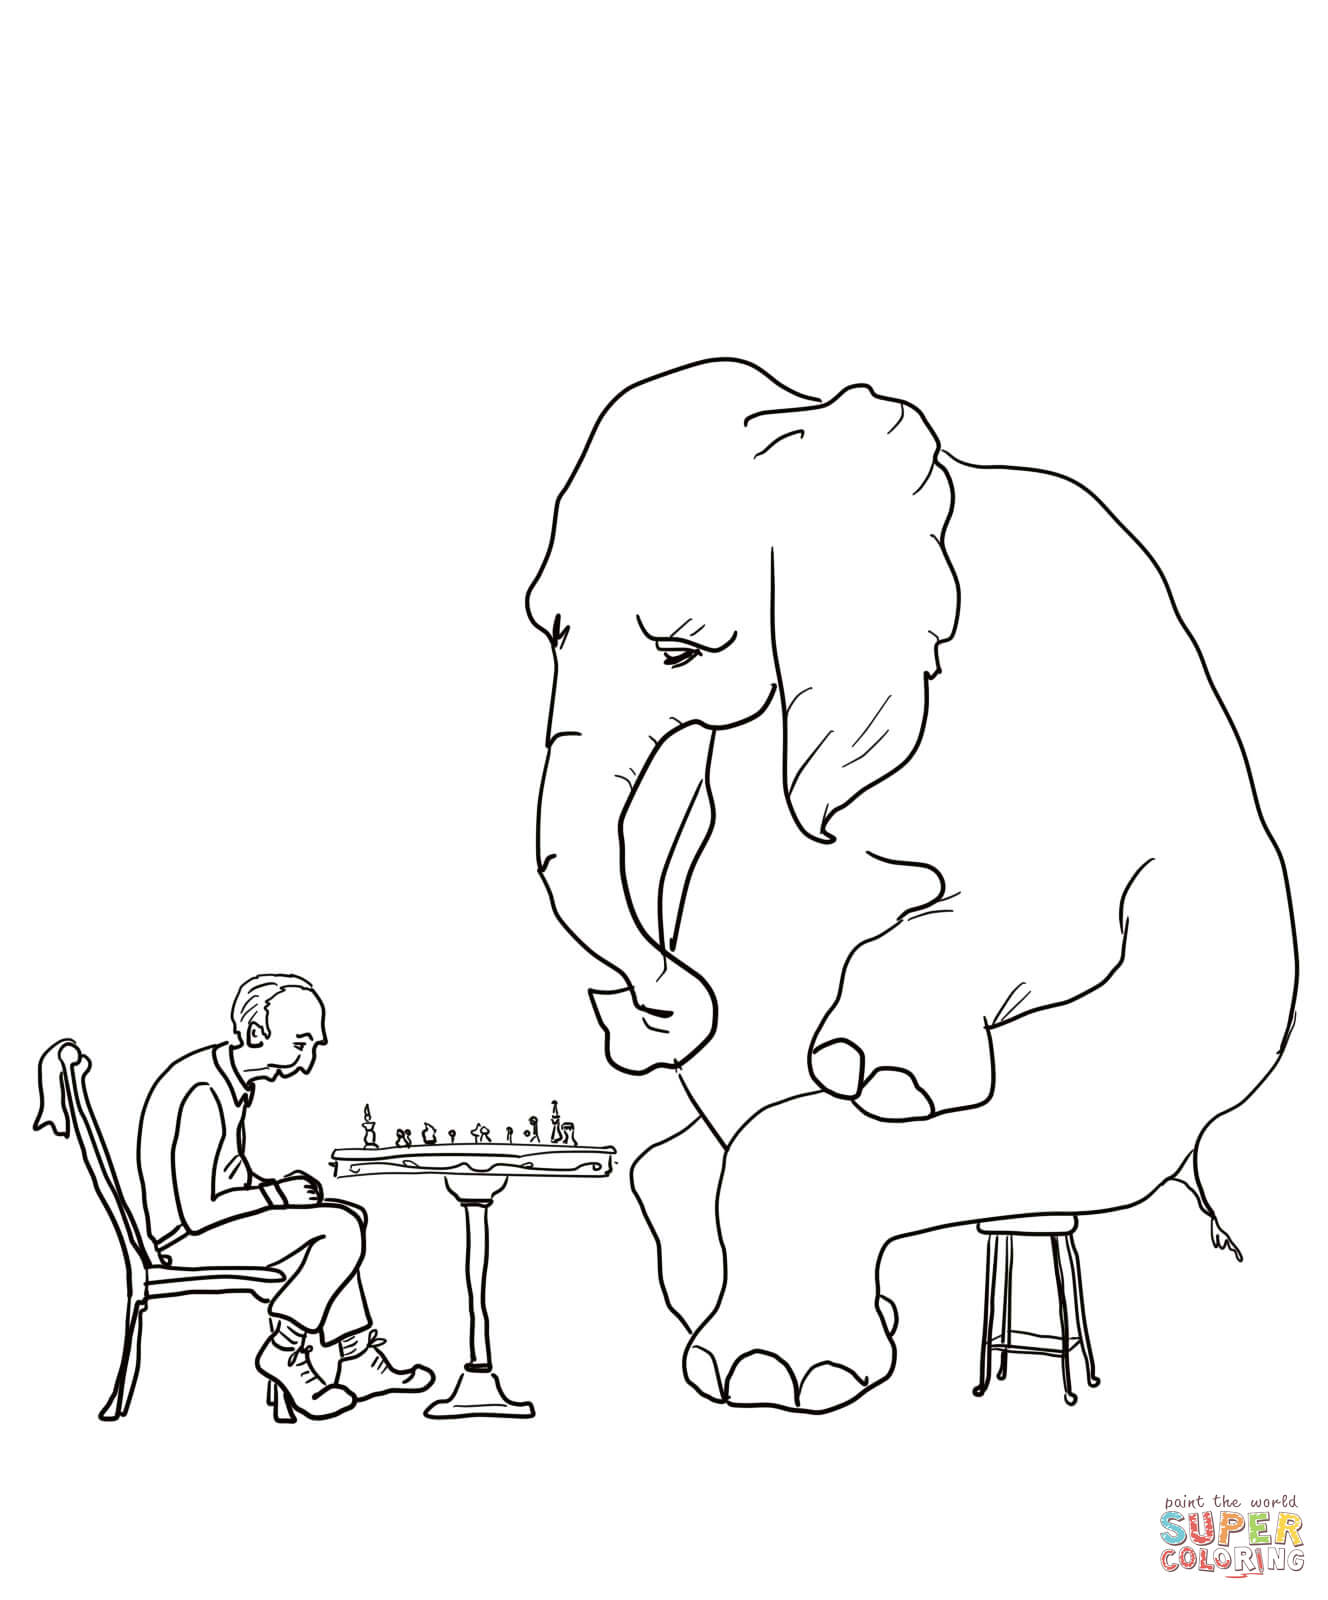 Mr Mcgee and the Elephant coloring page | Free Printable Coloring ...